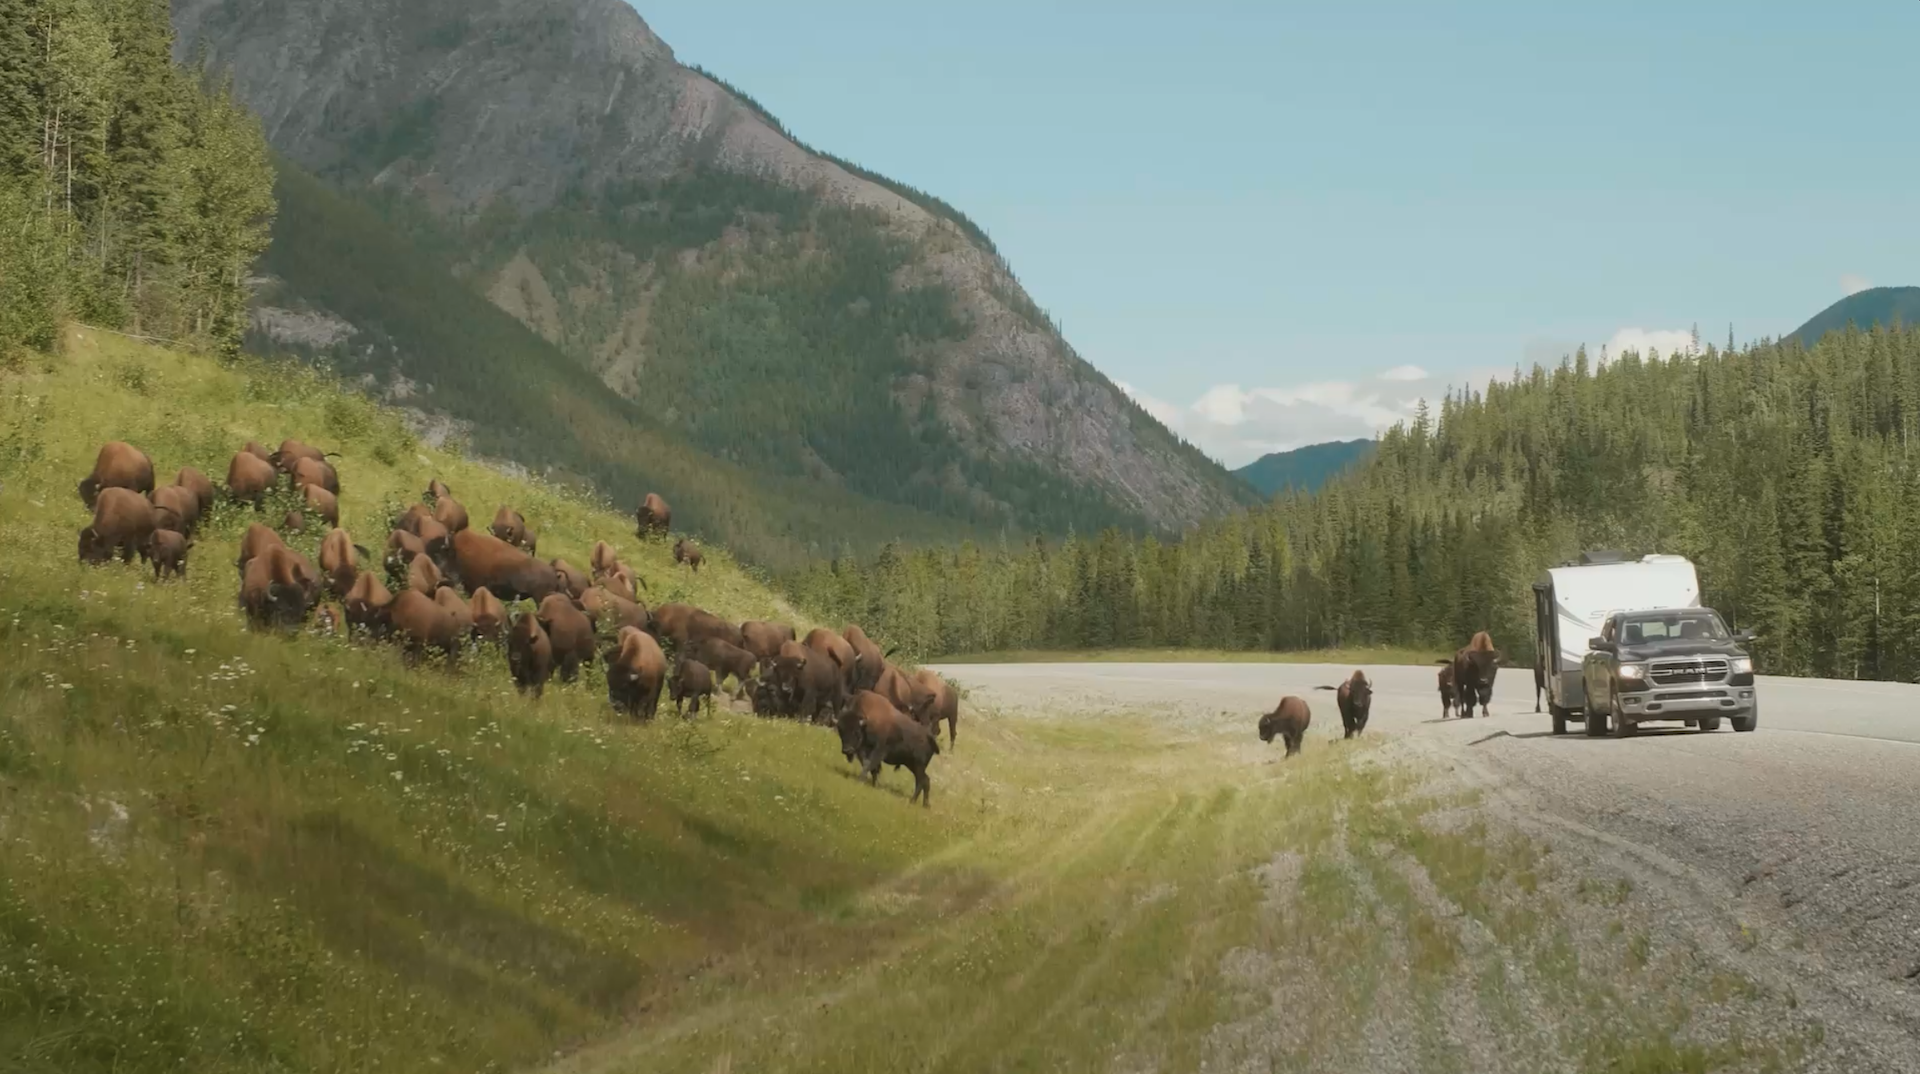 Bison on the side of a mountain in BC, Canada